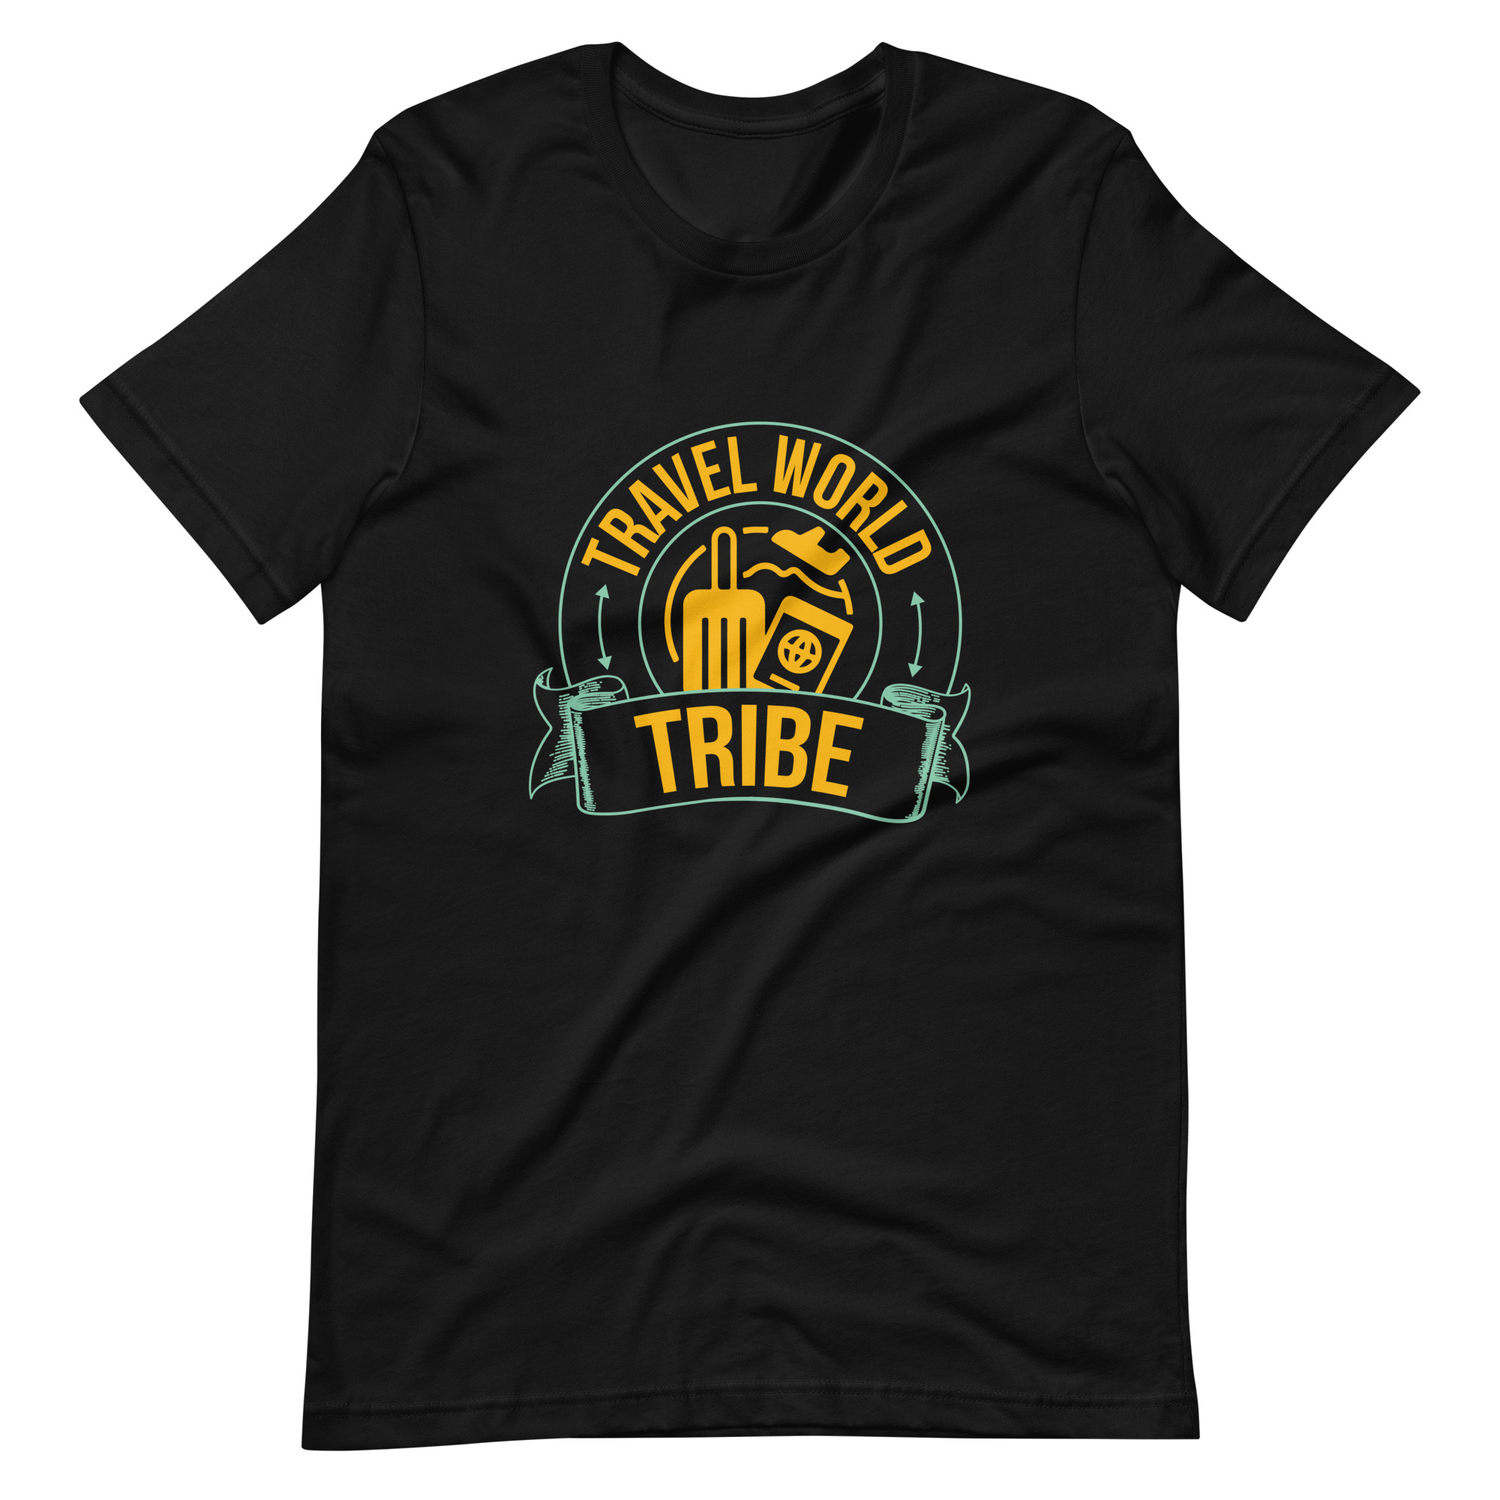 Travel World Tribe Collection!